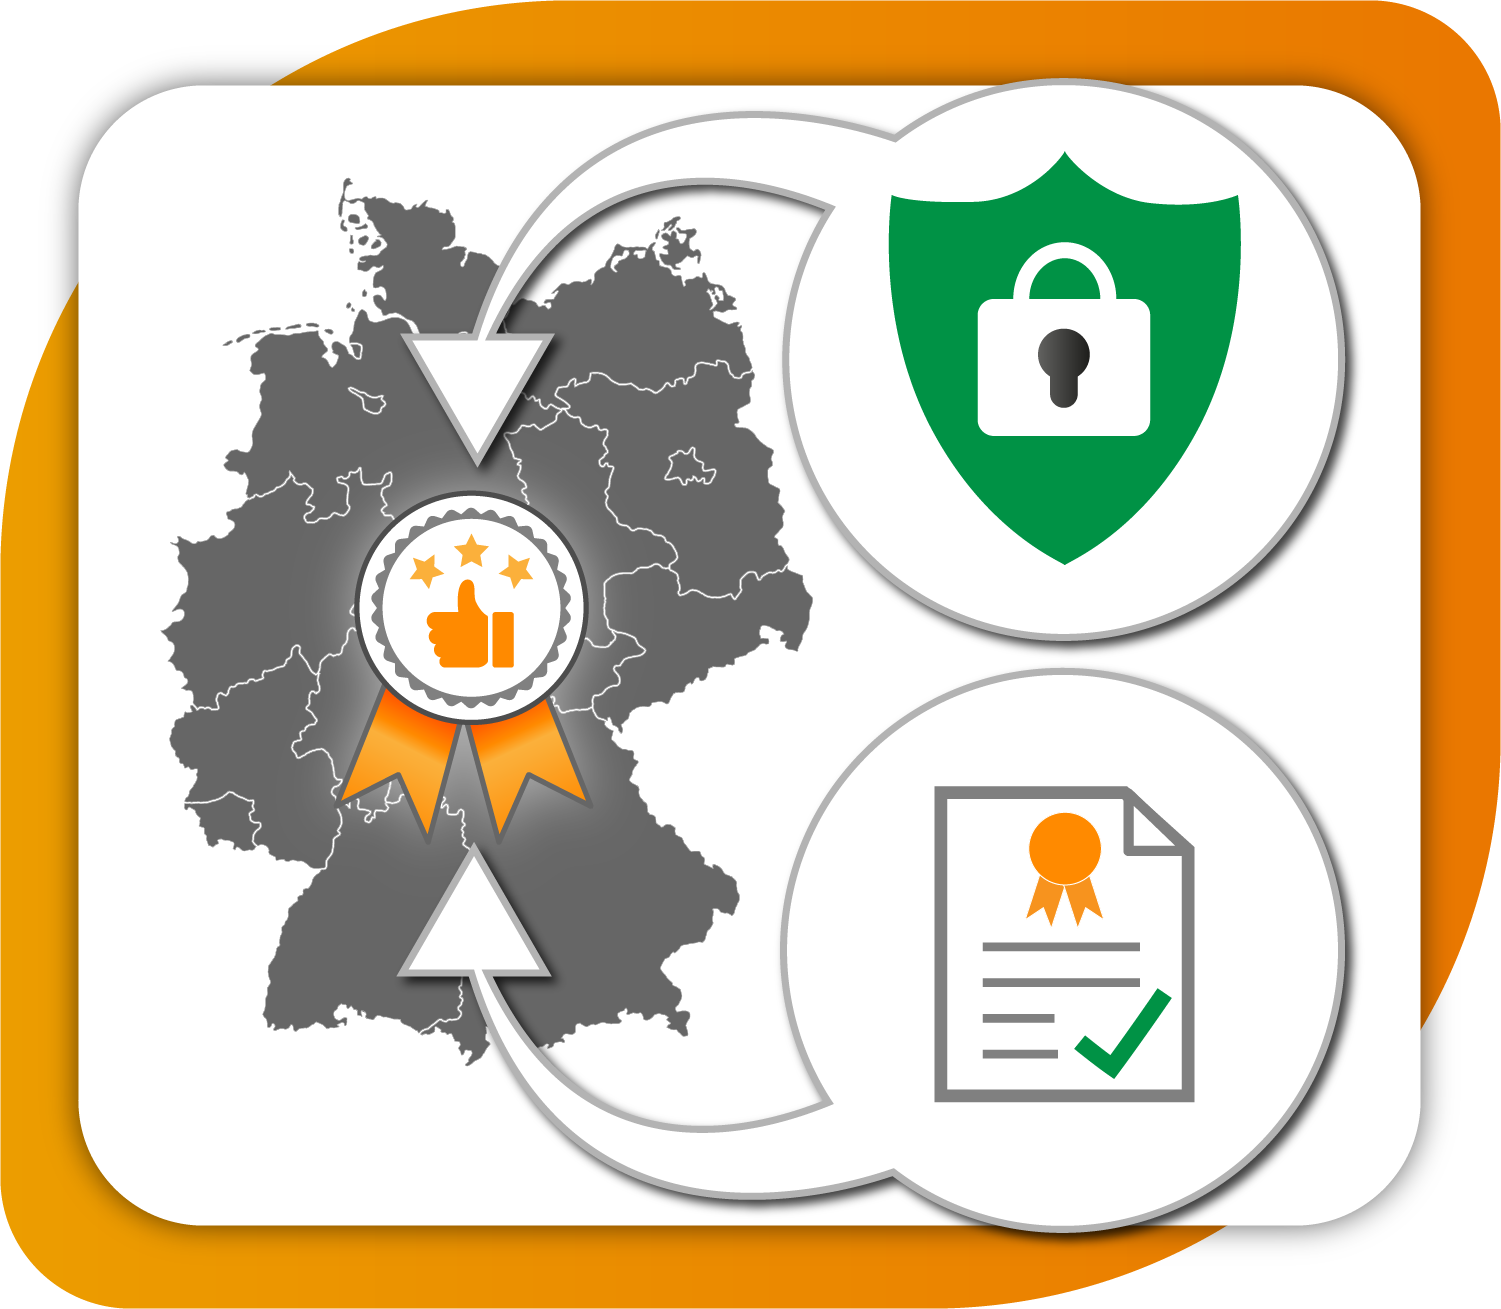 Data securely stored in german data centers